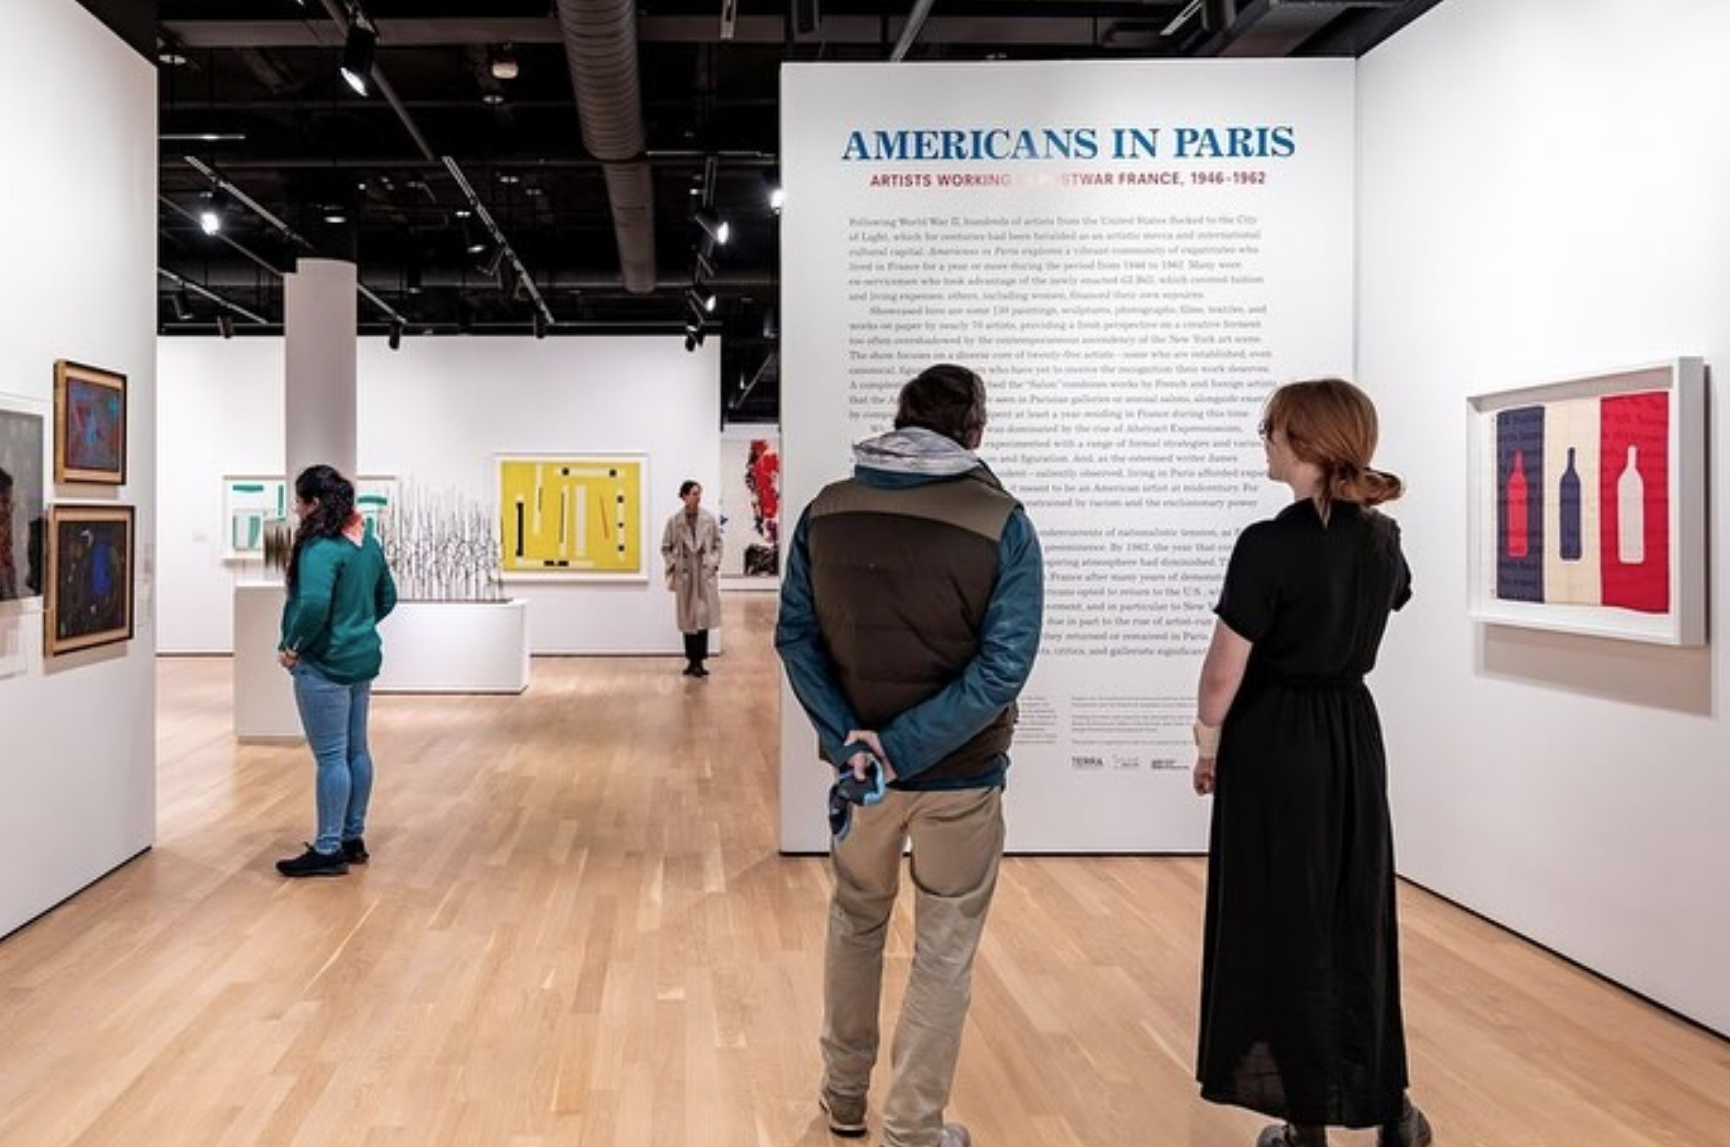 Visitors observing the “Americans in Paris” exhibit at the Grey Art Museum.